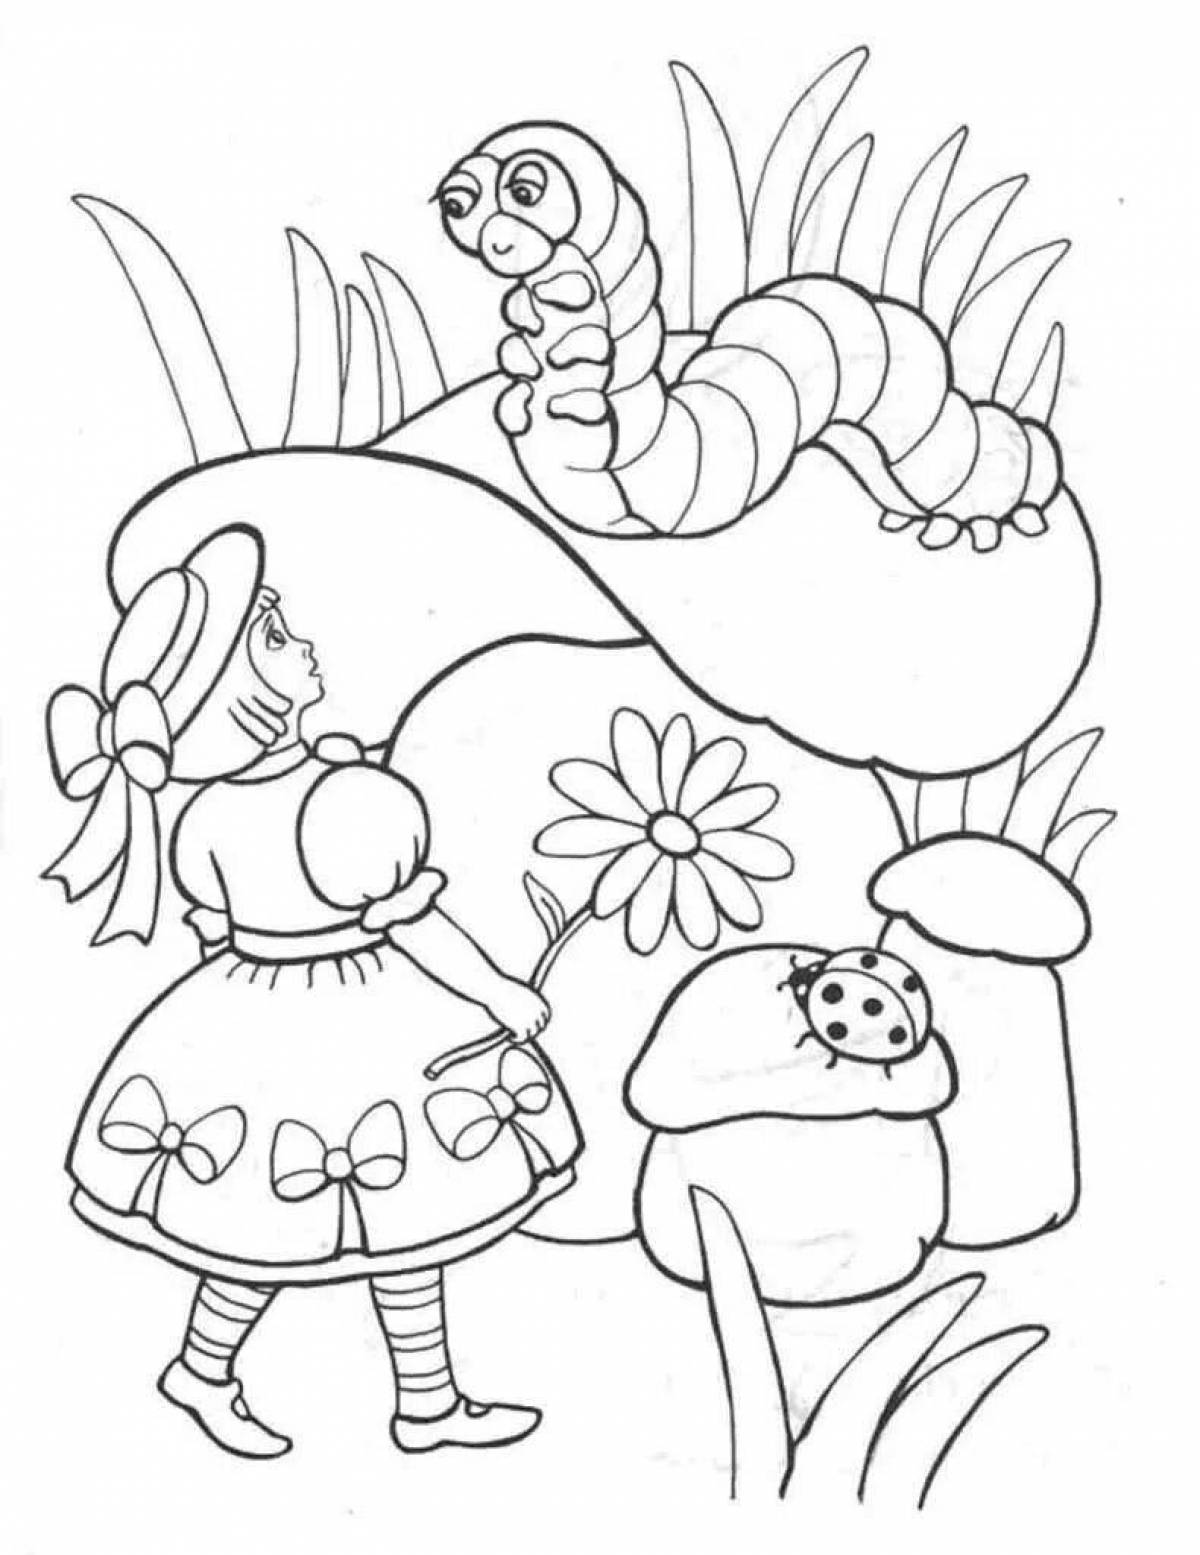 Intriguing fairy tale coloring book for girls